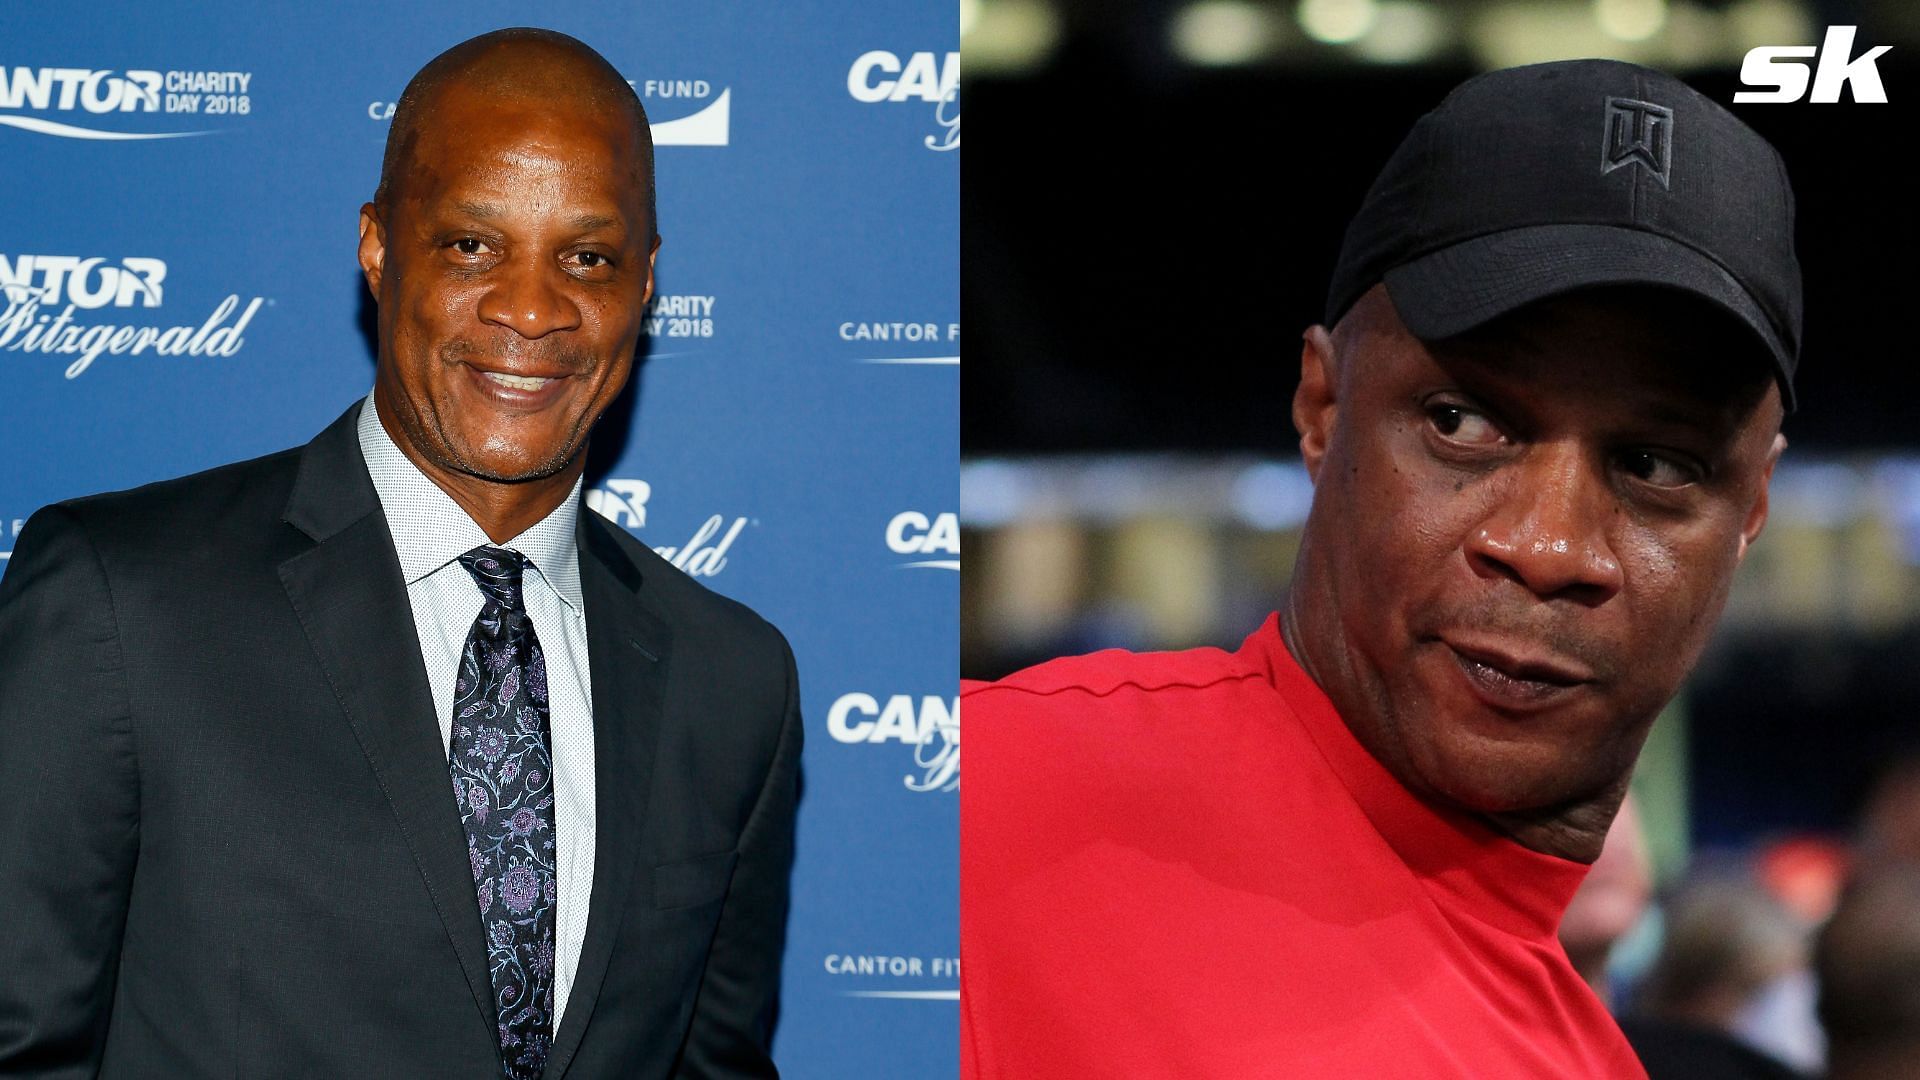 MLB fans shower love on Mets icon Darryl Strawberry after shocking news of a heart attack